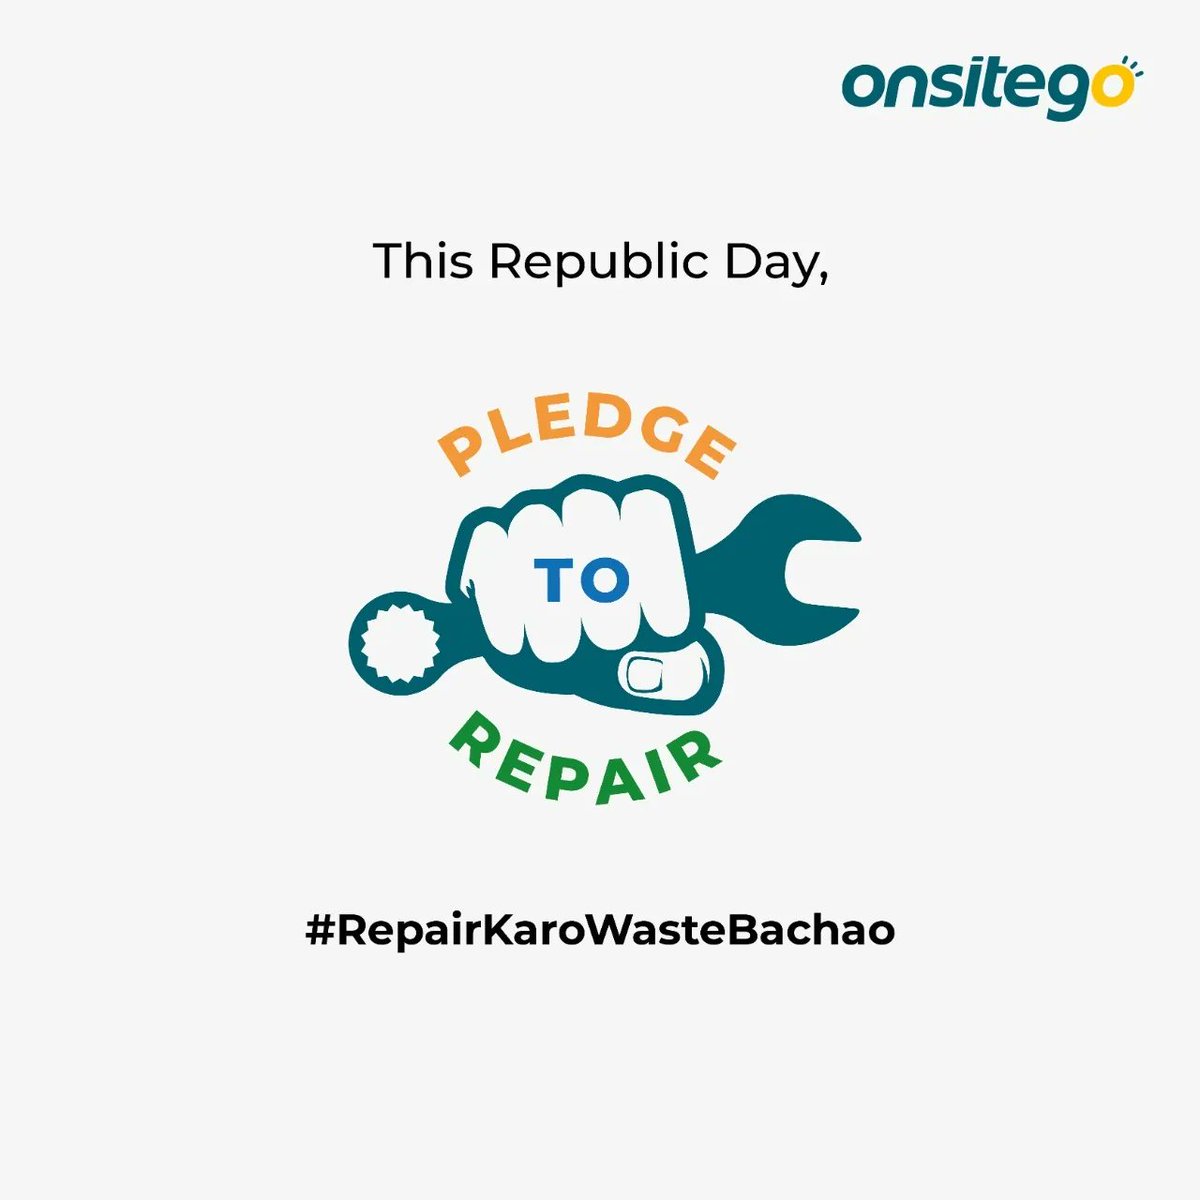 E-waste is a huge problem for the environment and our country so this #RepublicDay exercise your right to repair your devices! Choose Onsitego plans & services to extend the lifespan of your devices and keep them out of the landfill.

#RepairKaroWasteBachao ✨